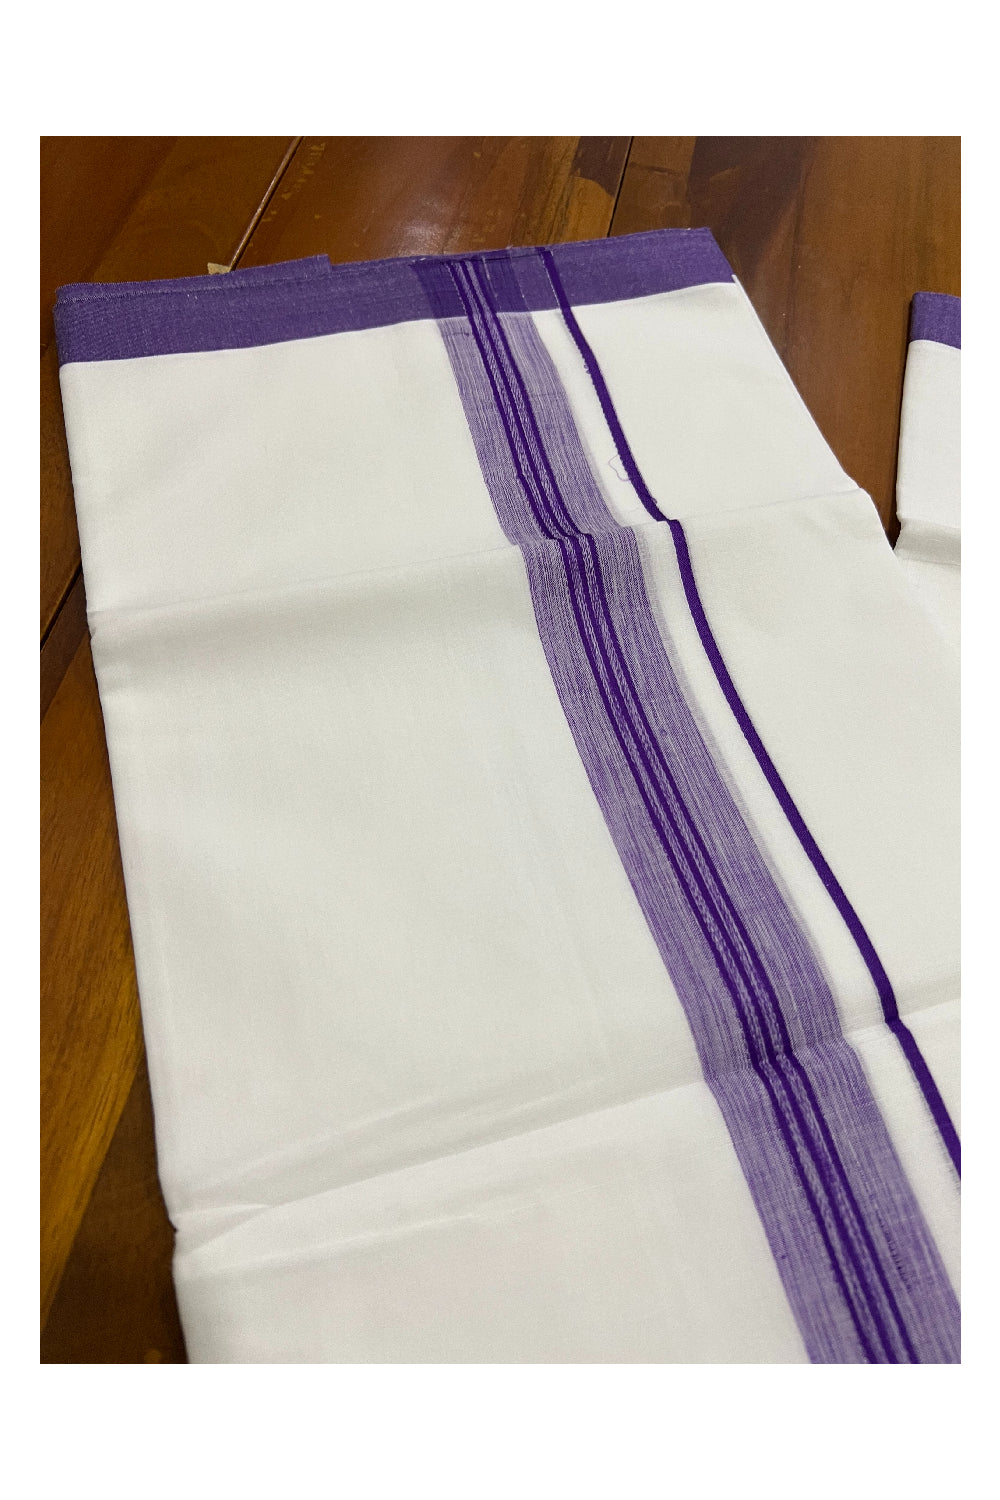 Pure White Kerala Cotton Double Mundu with Violet Border (South Indian Dhoti)